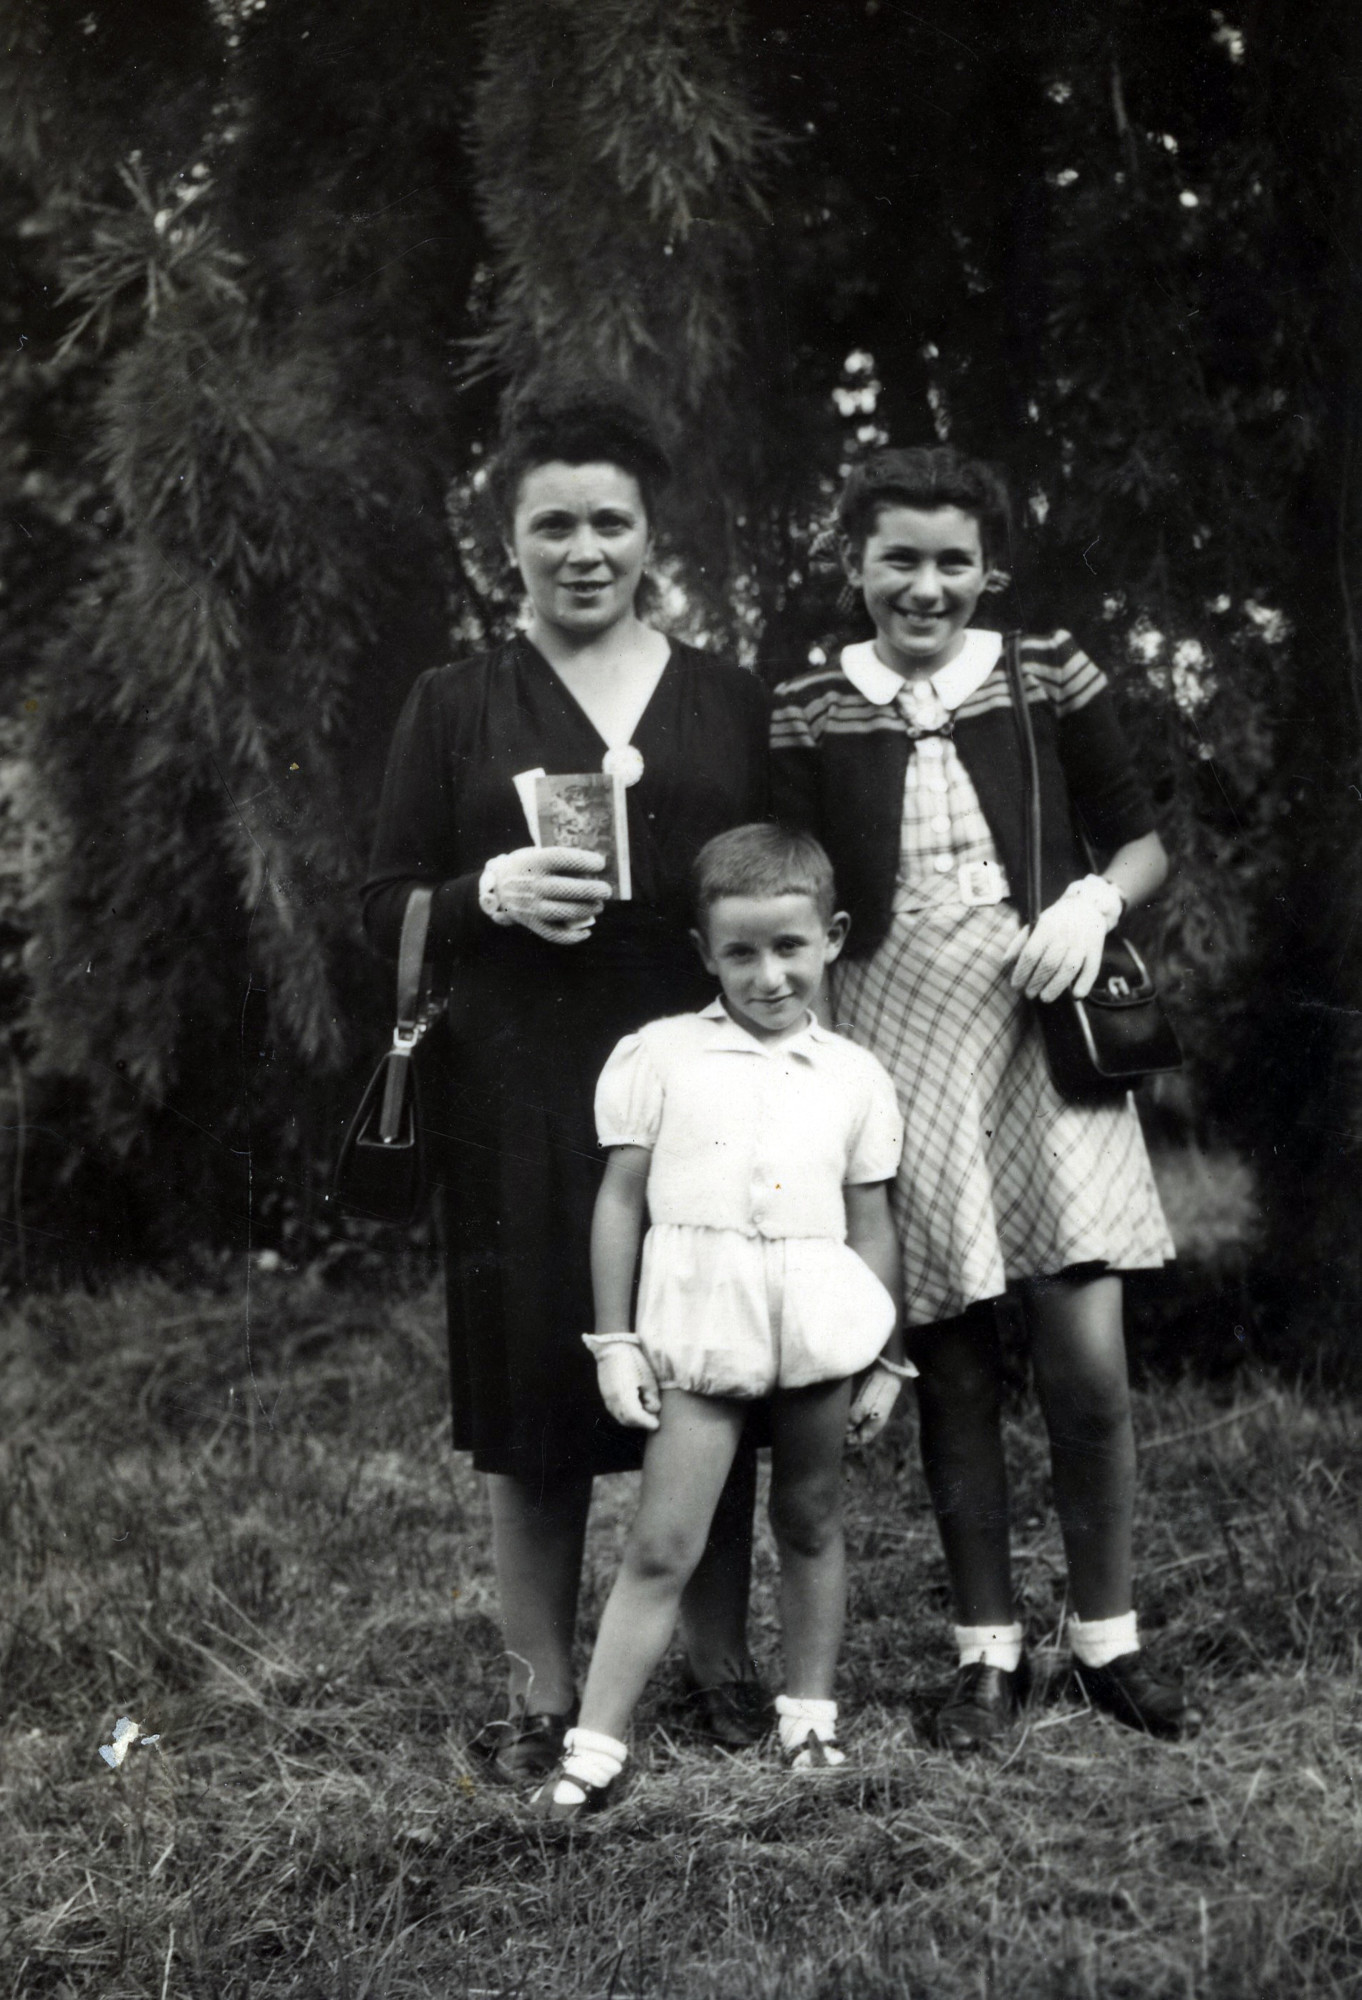 A Jewish family in France shortly after the war.

Pictured are Jenny Flantzer and her daughter Rachelle, with Pierre Flantzer.